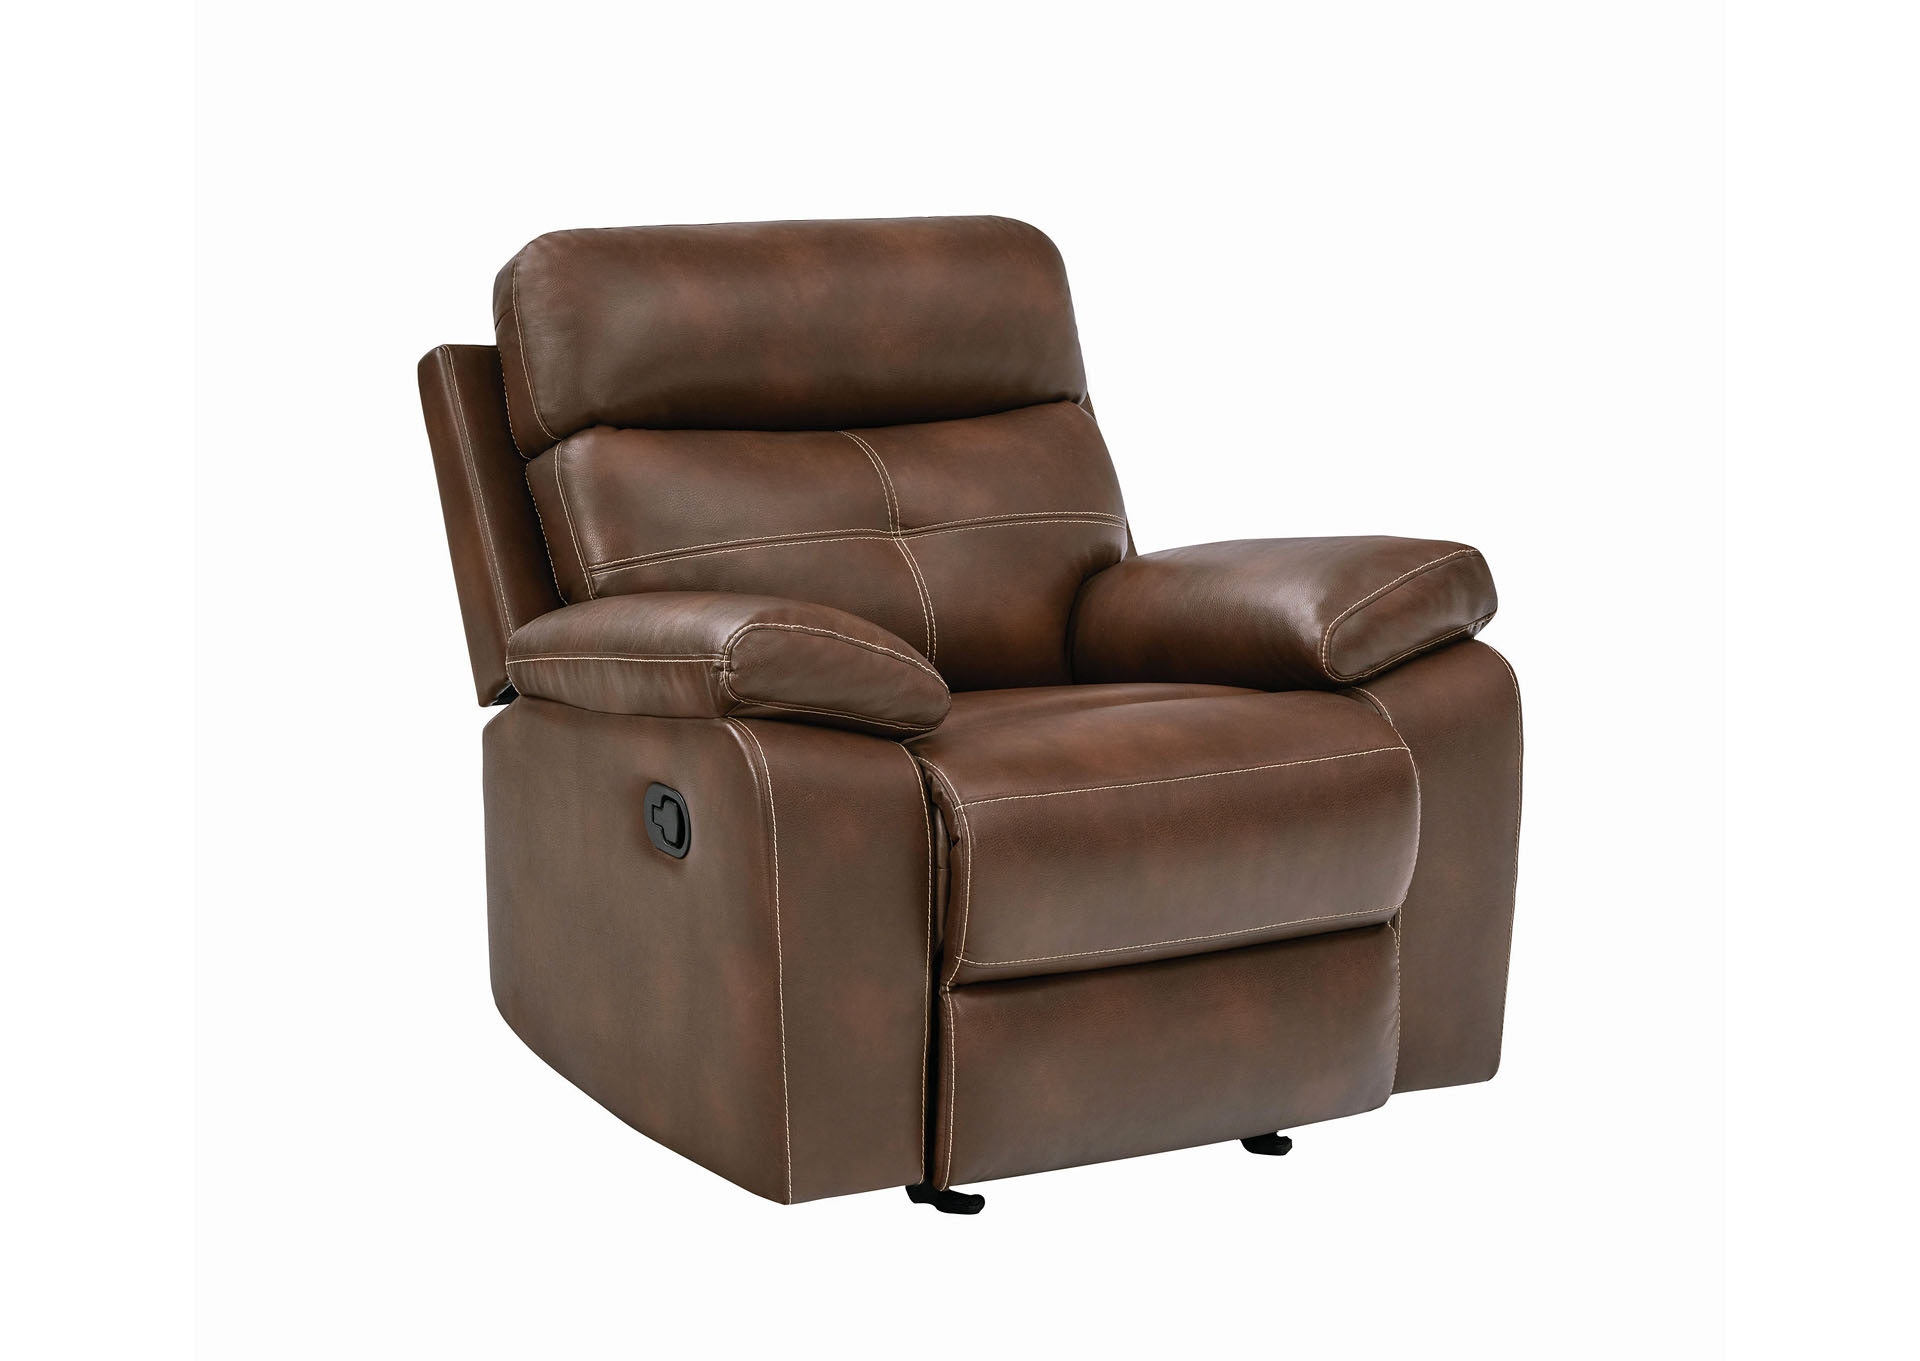 Judge Gray Damiano Brown Faux Leather, Brown Faux Leather Loveseat Recliner